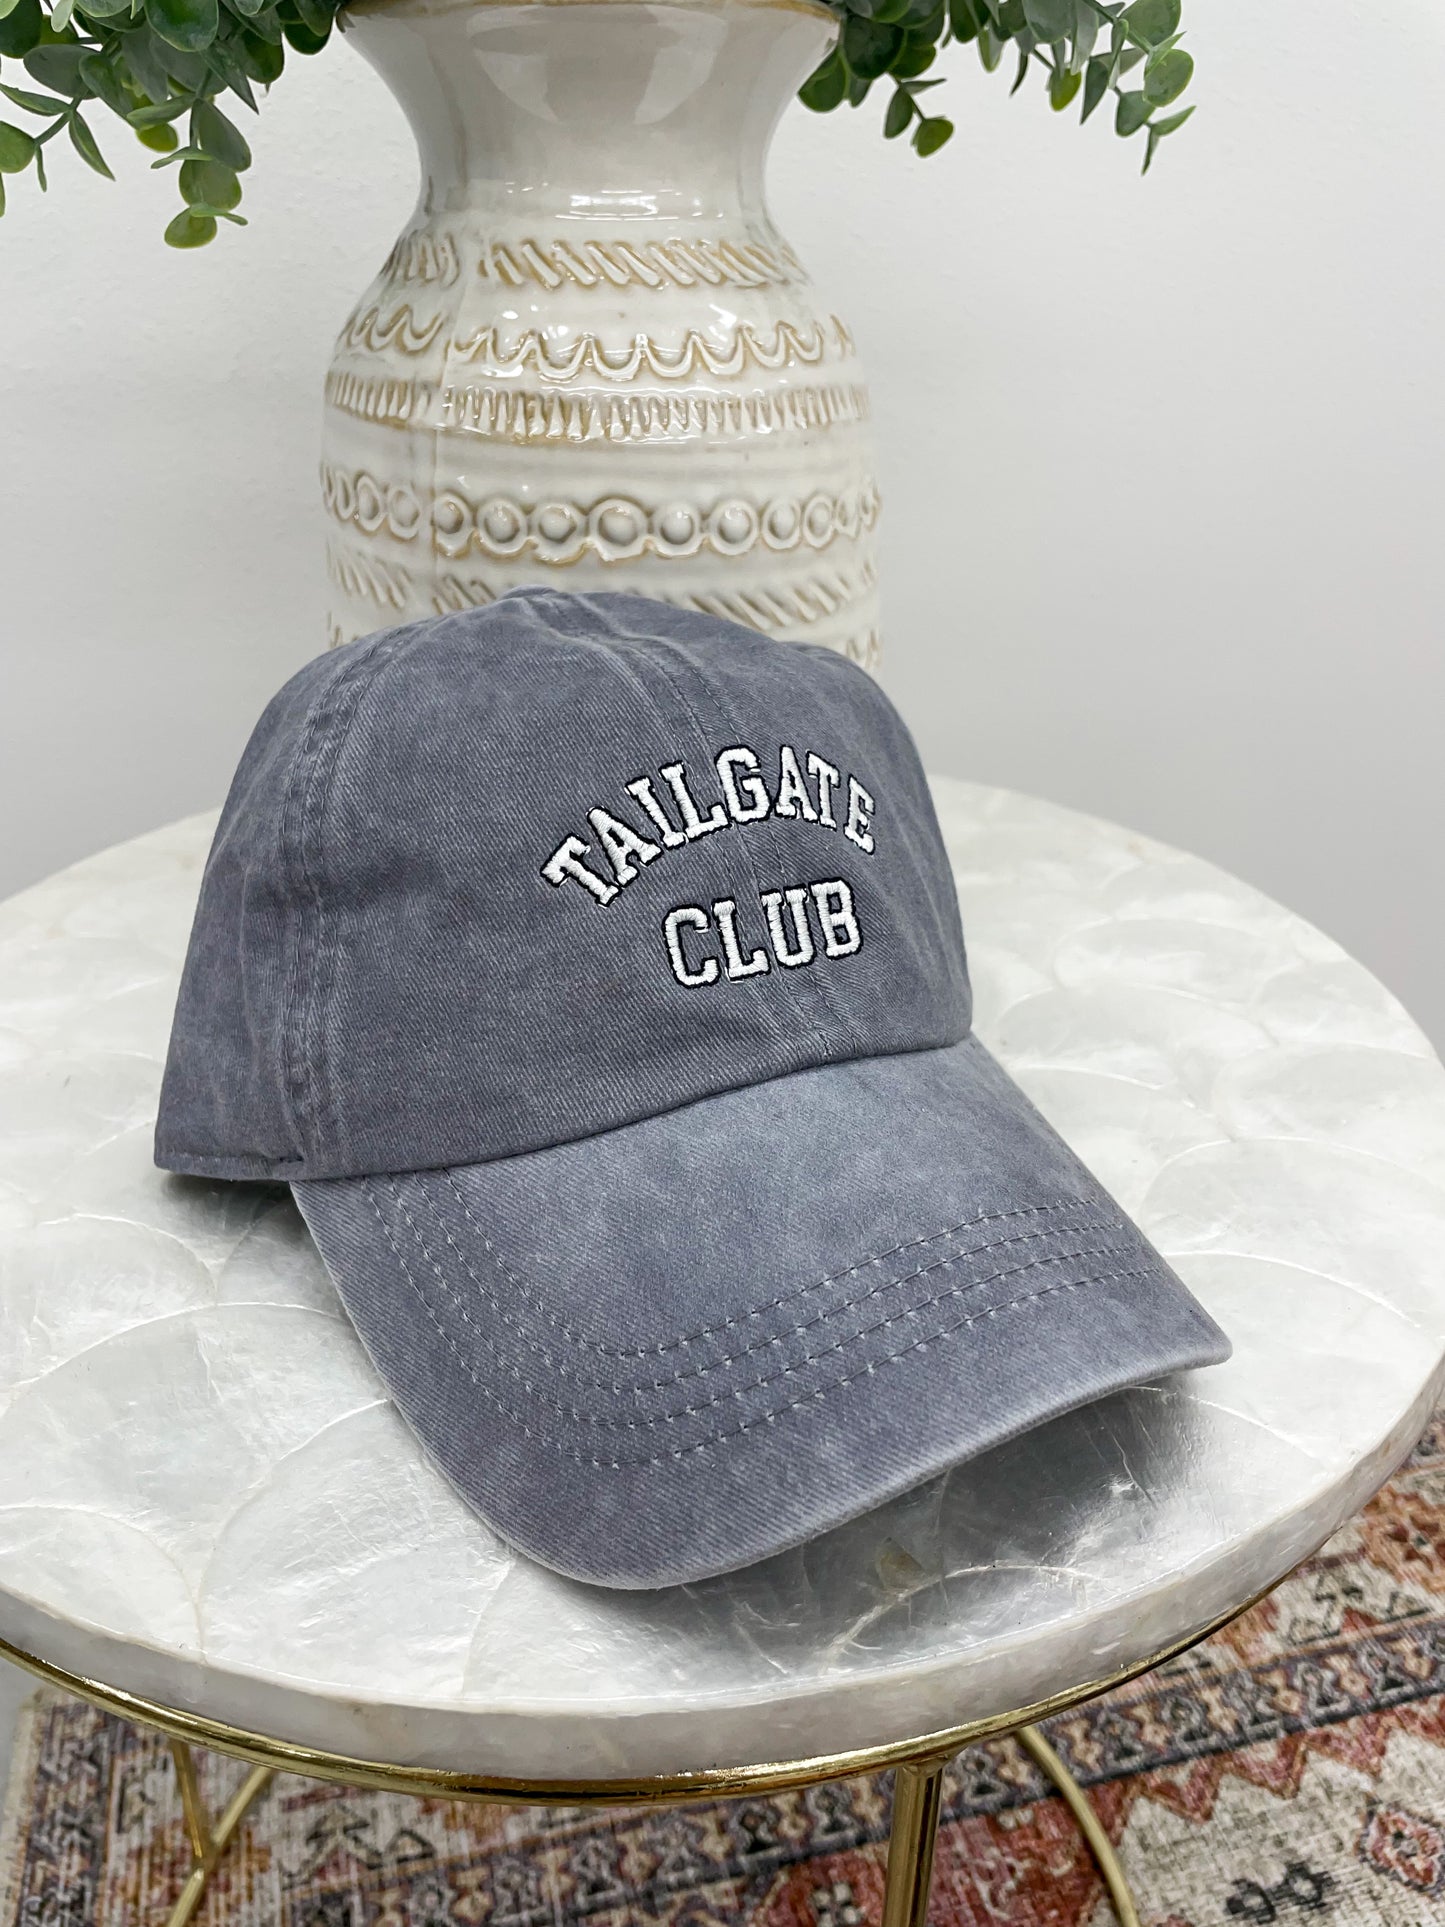 Tailgate Club Embroidered Baseball Cap Gray